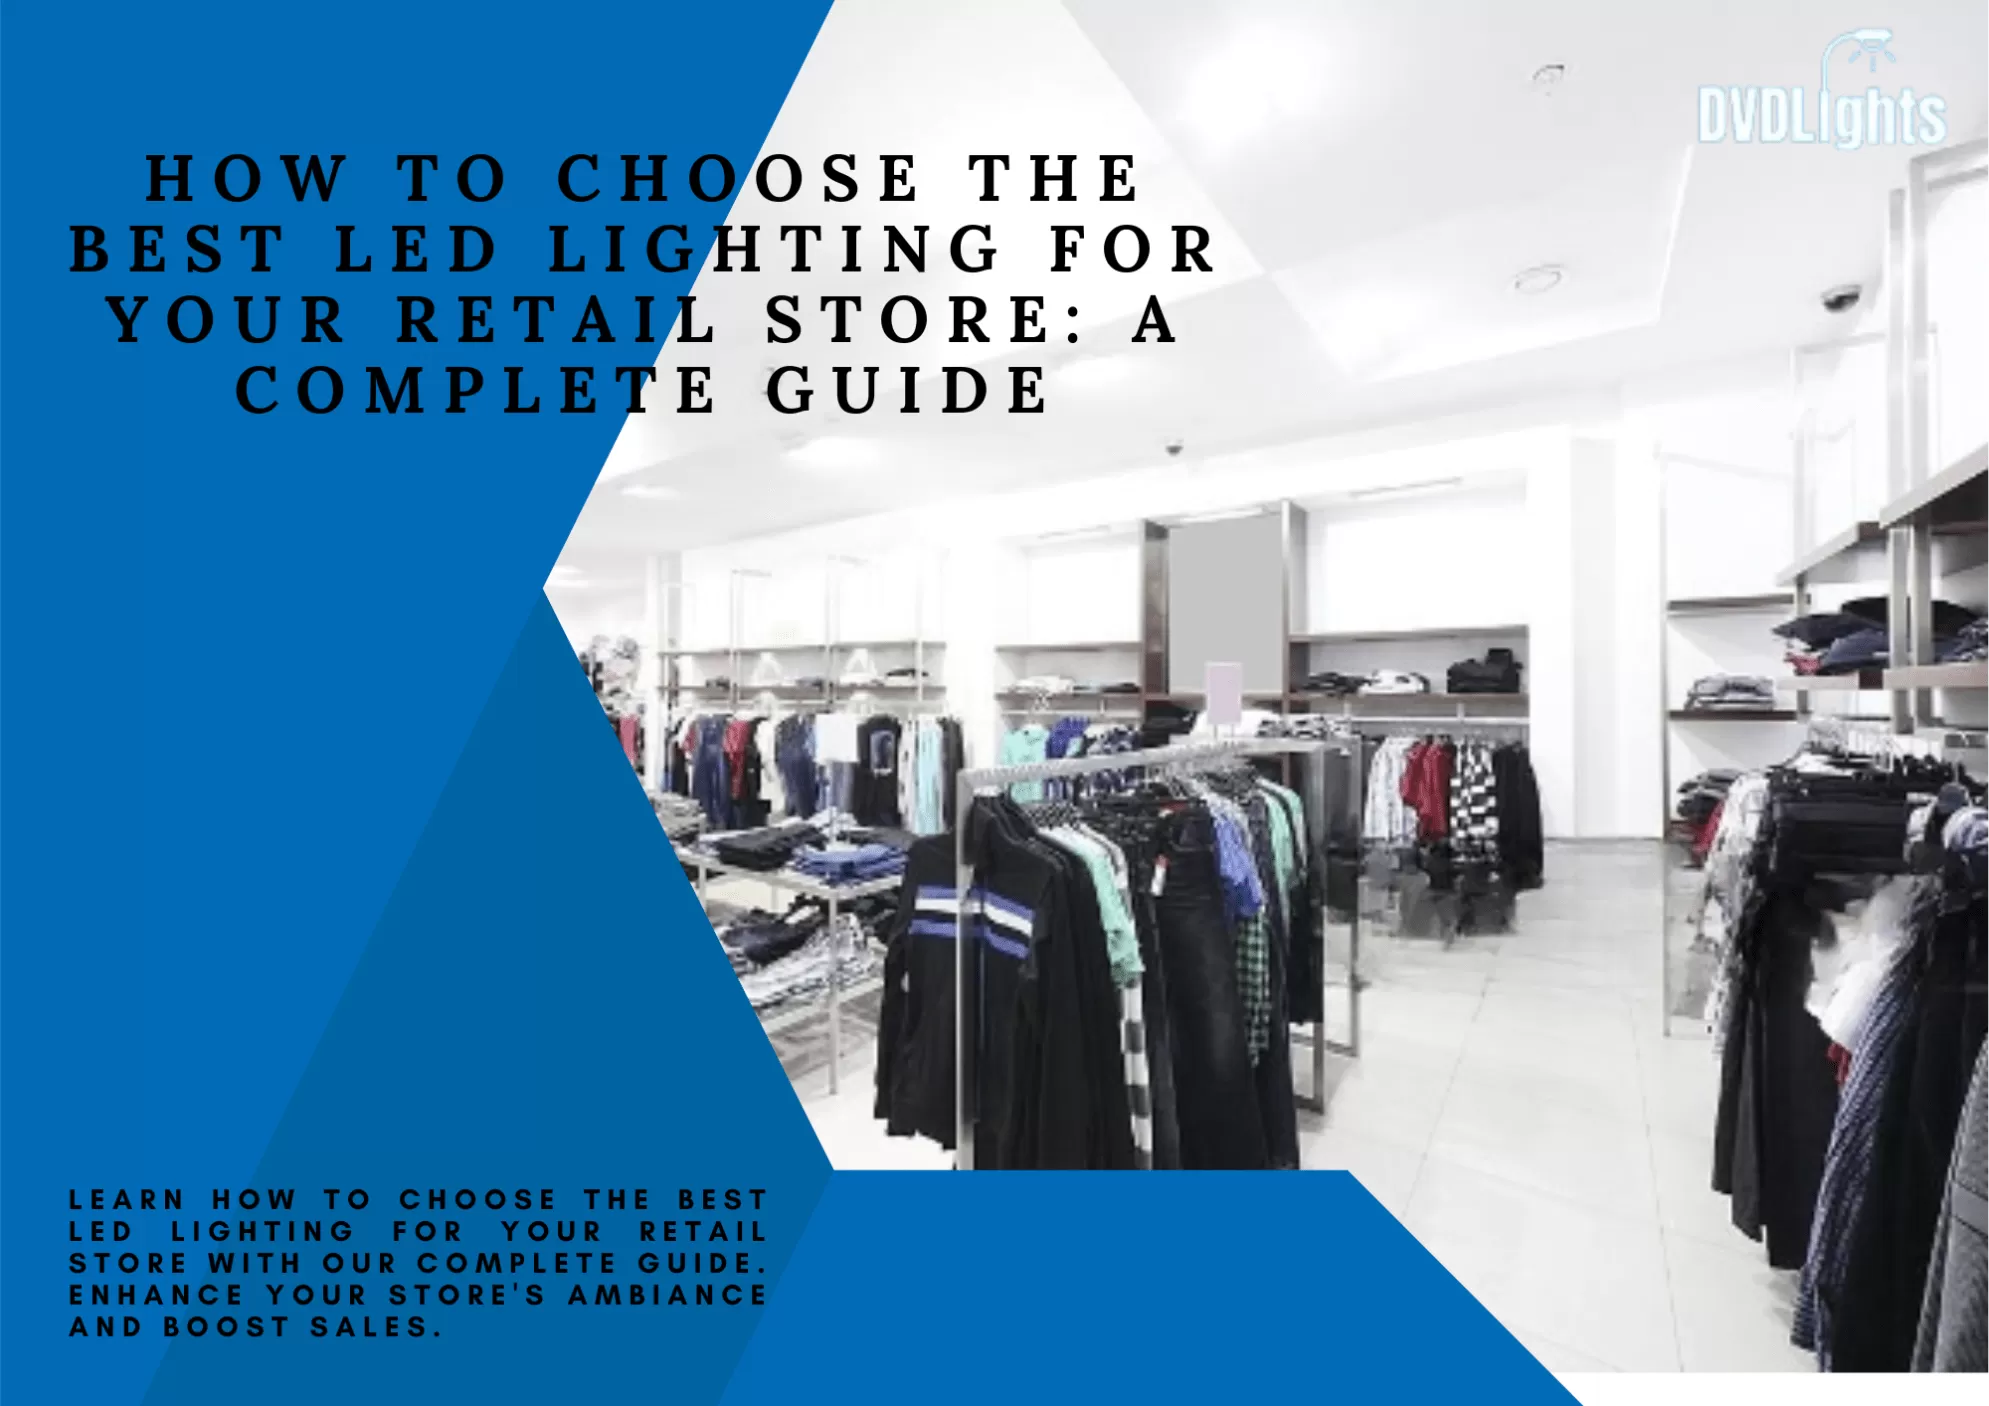 LED Lighting for Your Retail Store